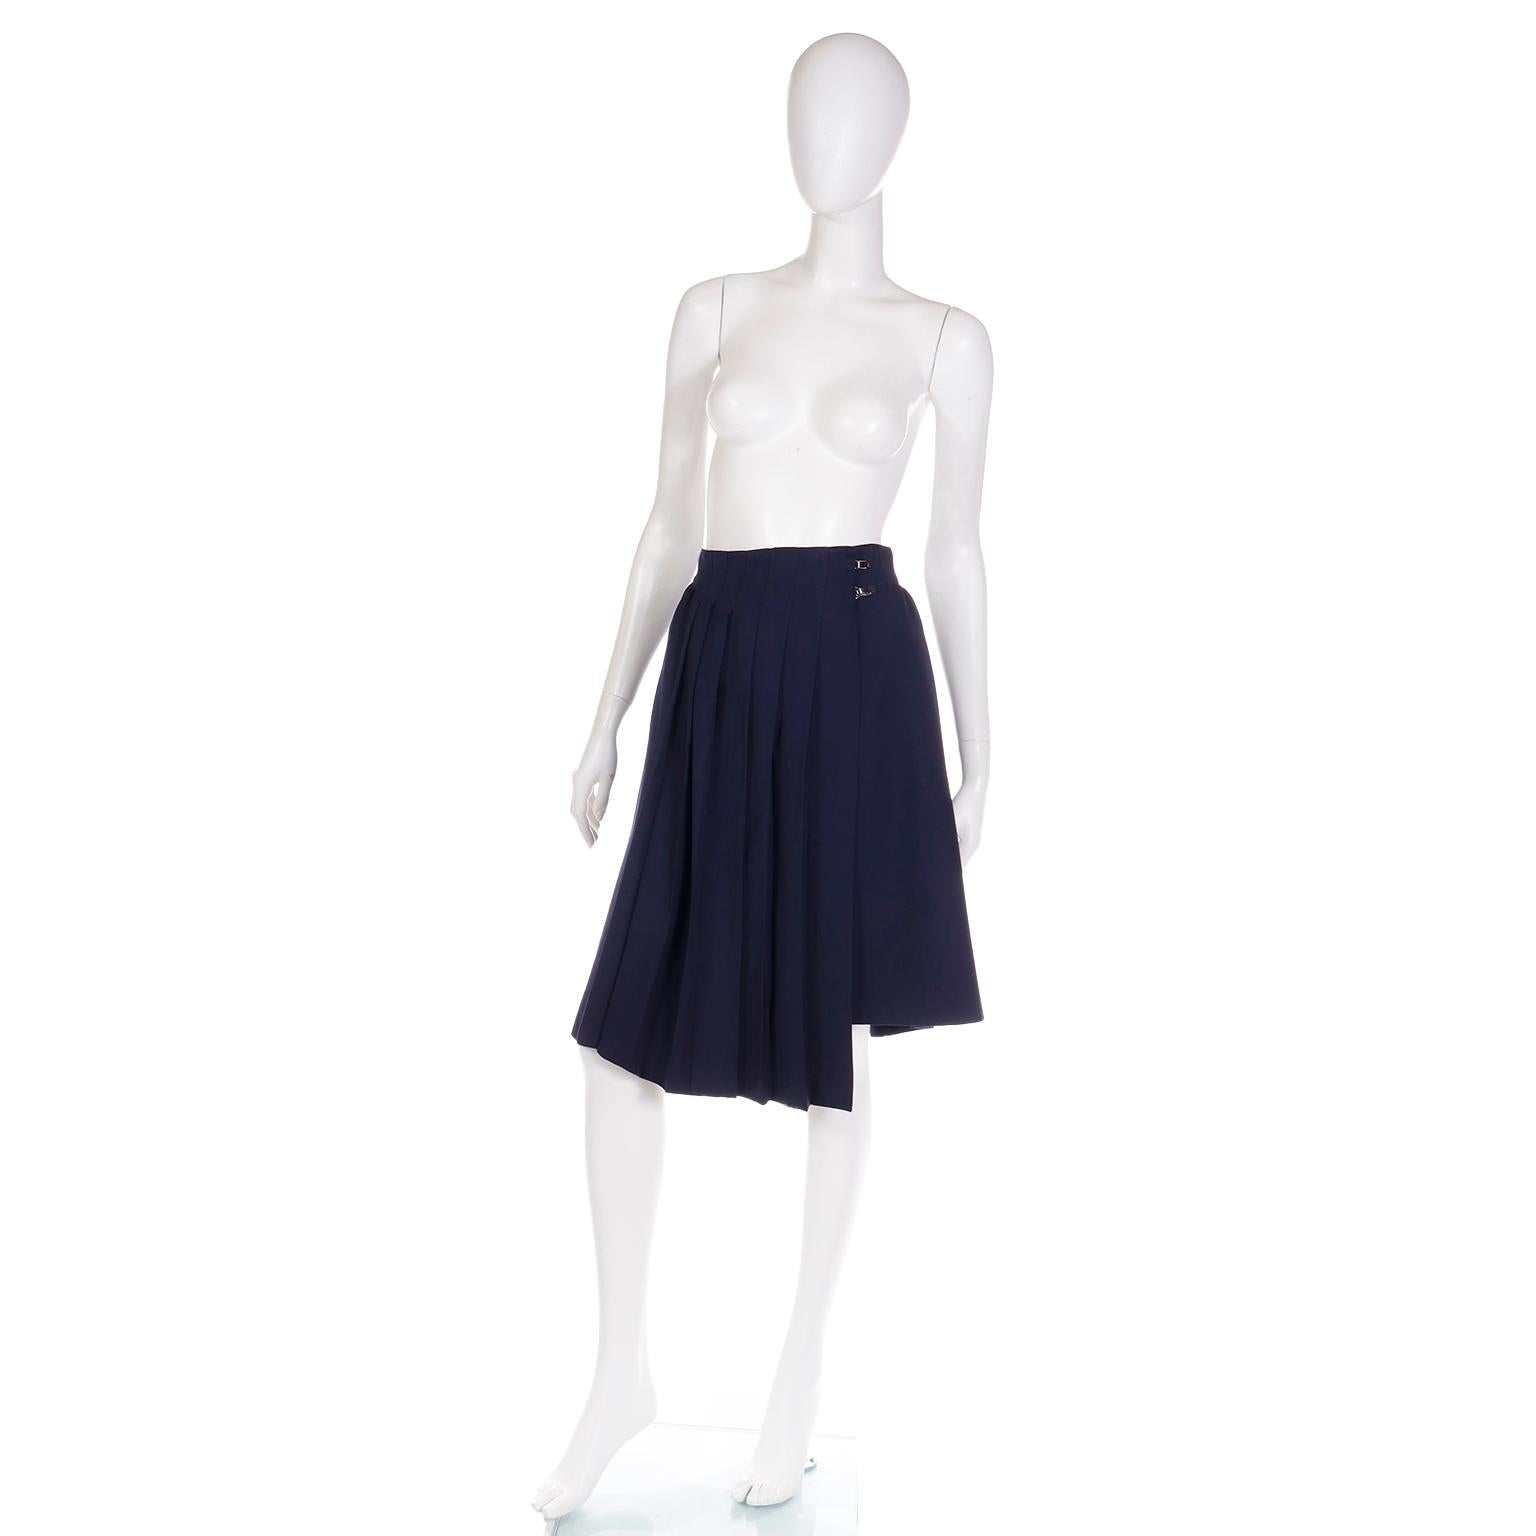 This 1980's Claude Montana avant garde, dramatically pleated navy blue skirt is so unique and stylish. The skirt wraps in front, securing with two metal toggles that are signature Montana elements. The skirt has 2 side slit pockets, beautiful pleats